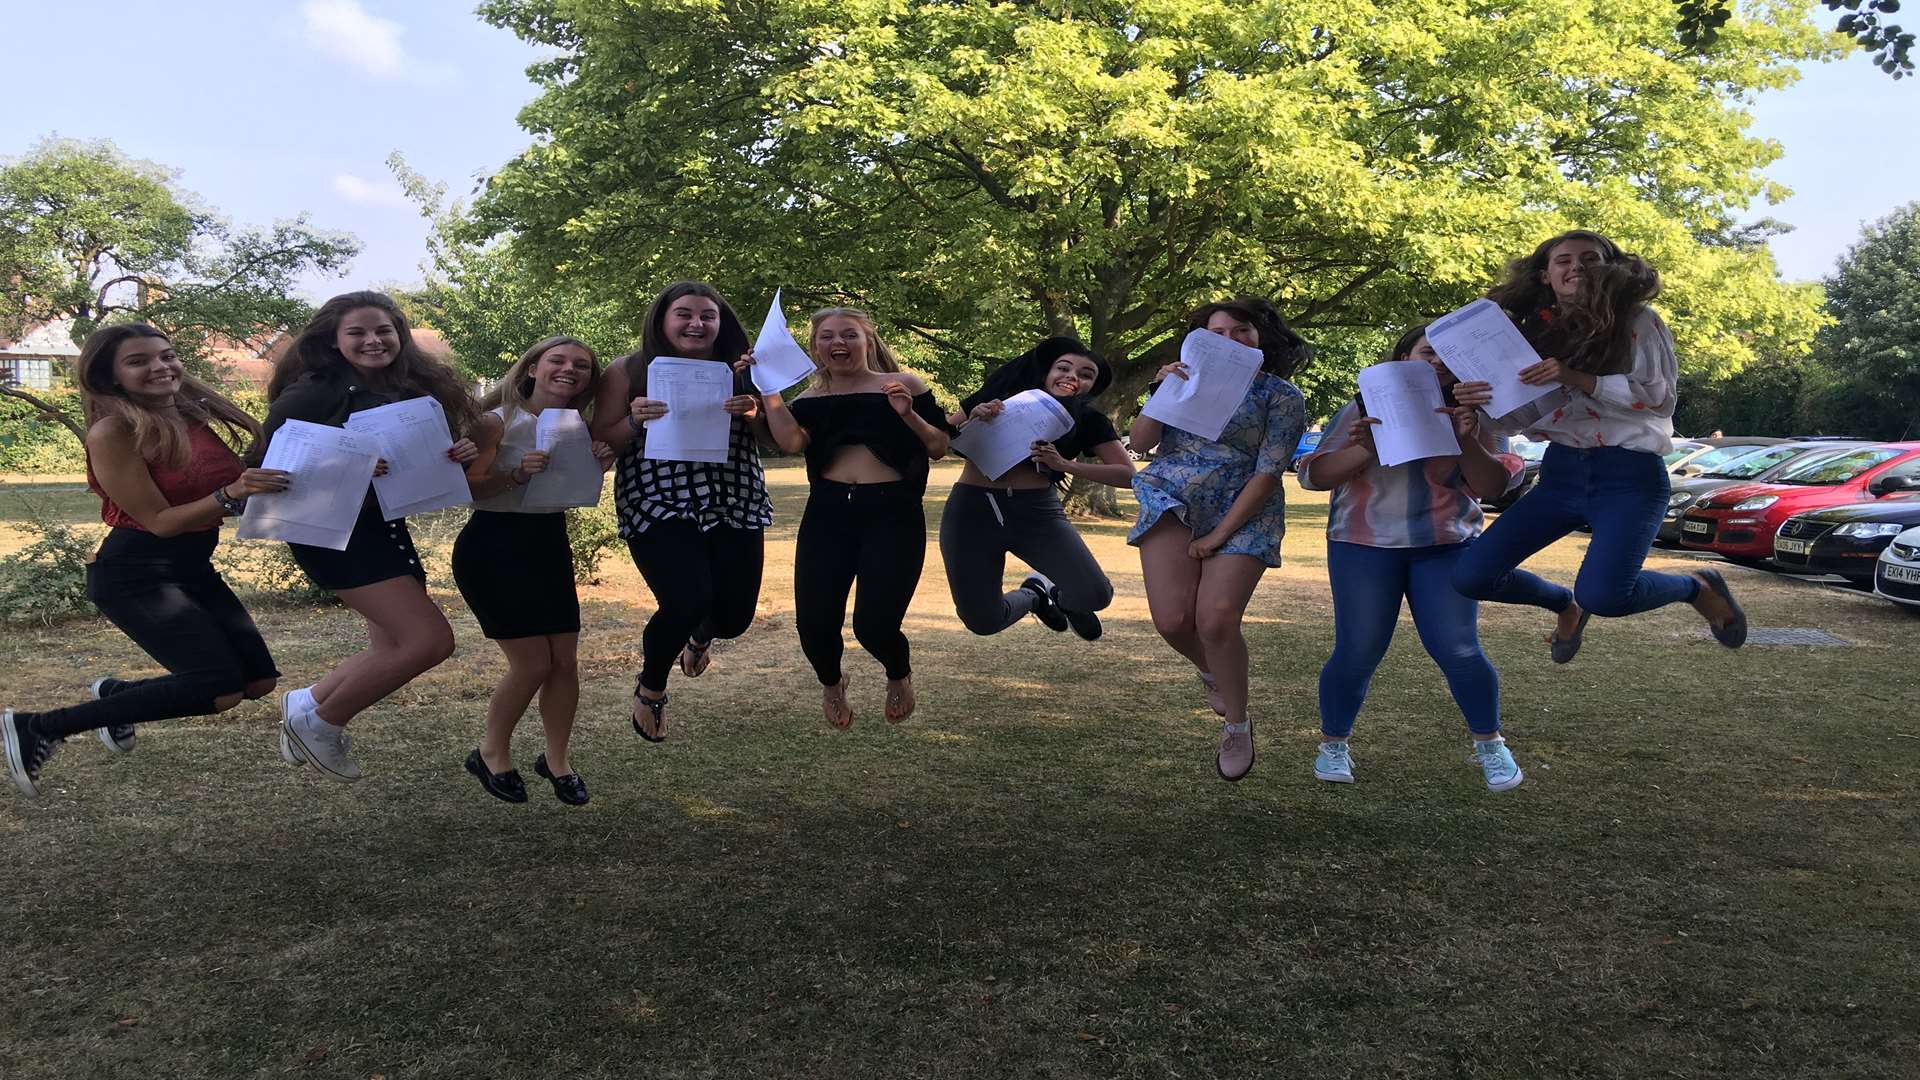 Highsted Grammar School students celebrate their A-level results